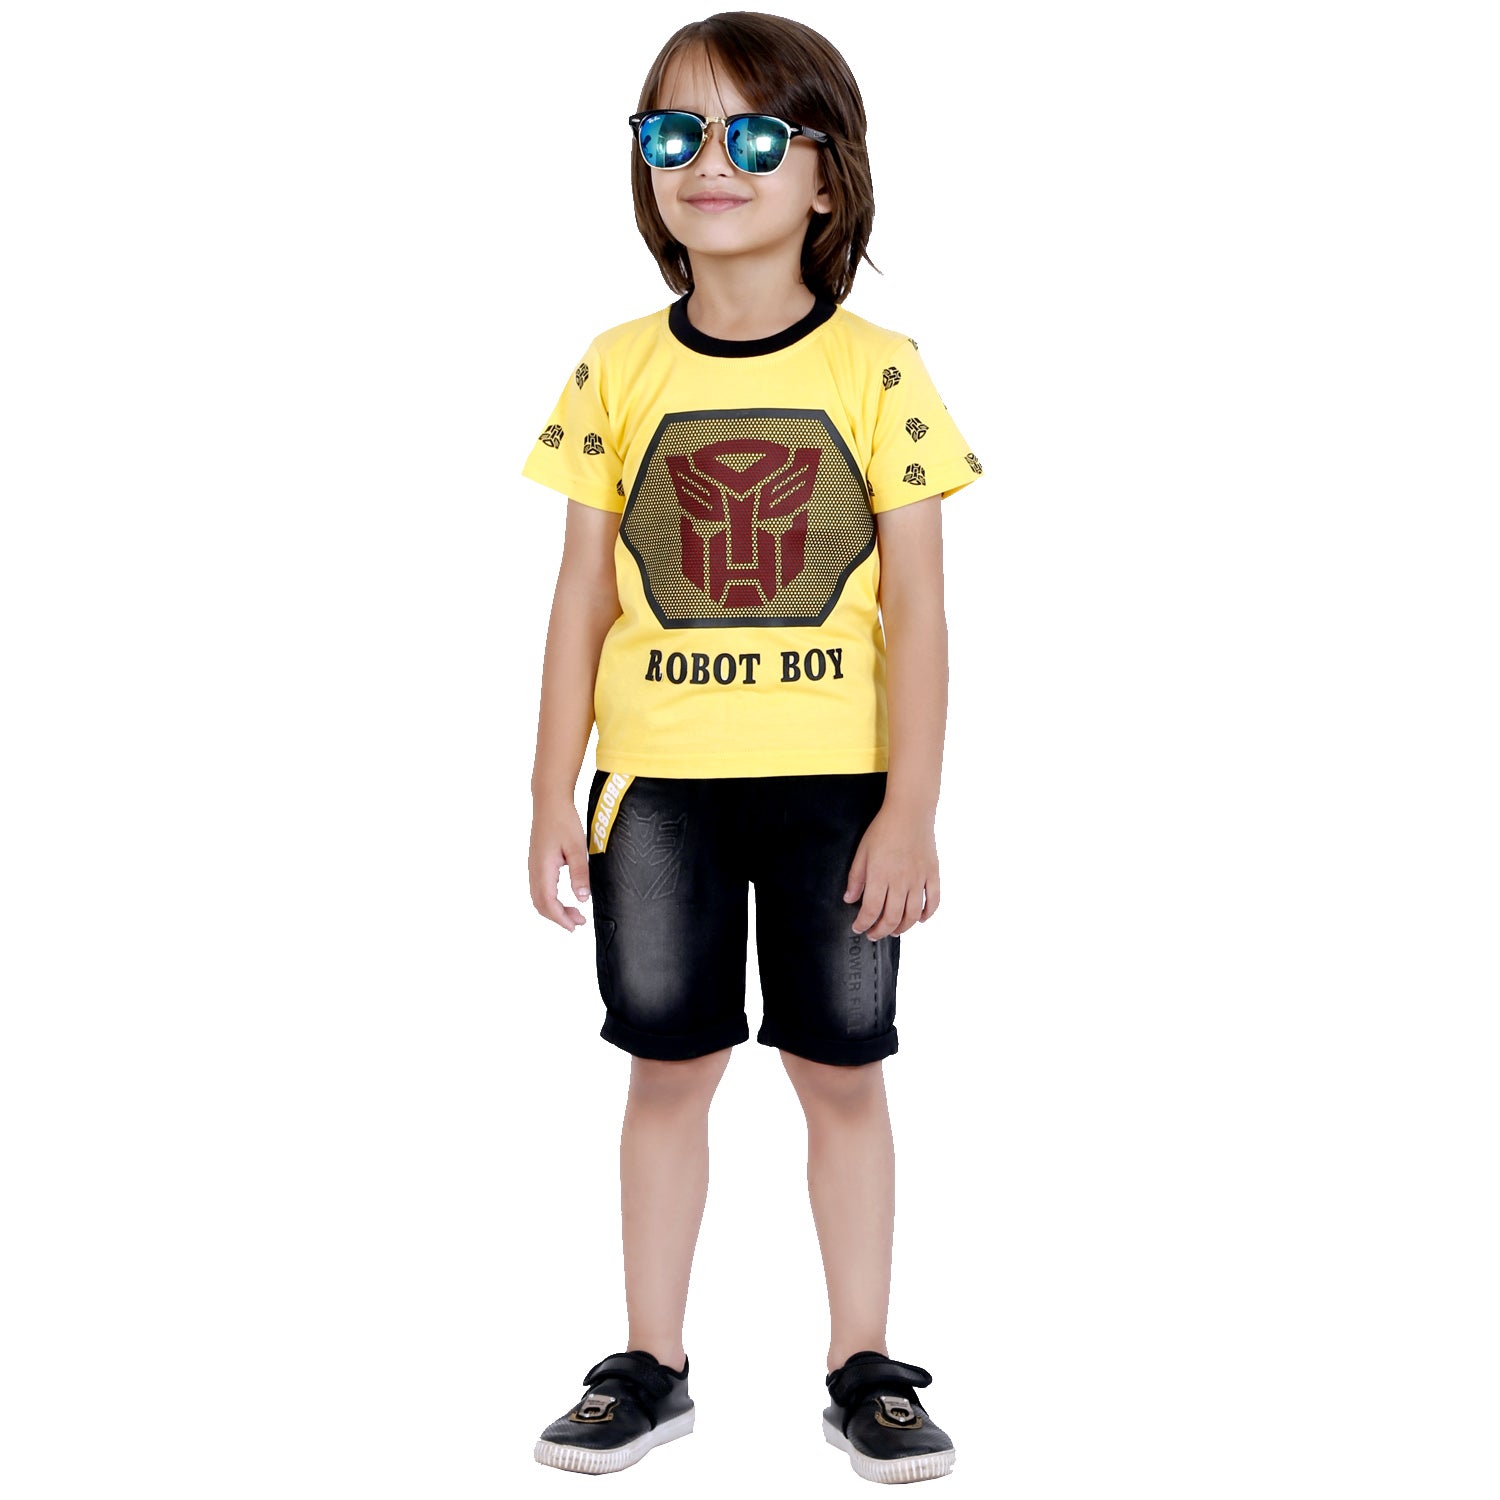 Bad Boys Stylish Outfit with Cotton T-shirt, Shorts and Hoodie - mashup boys